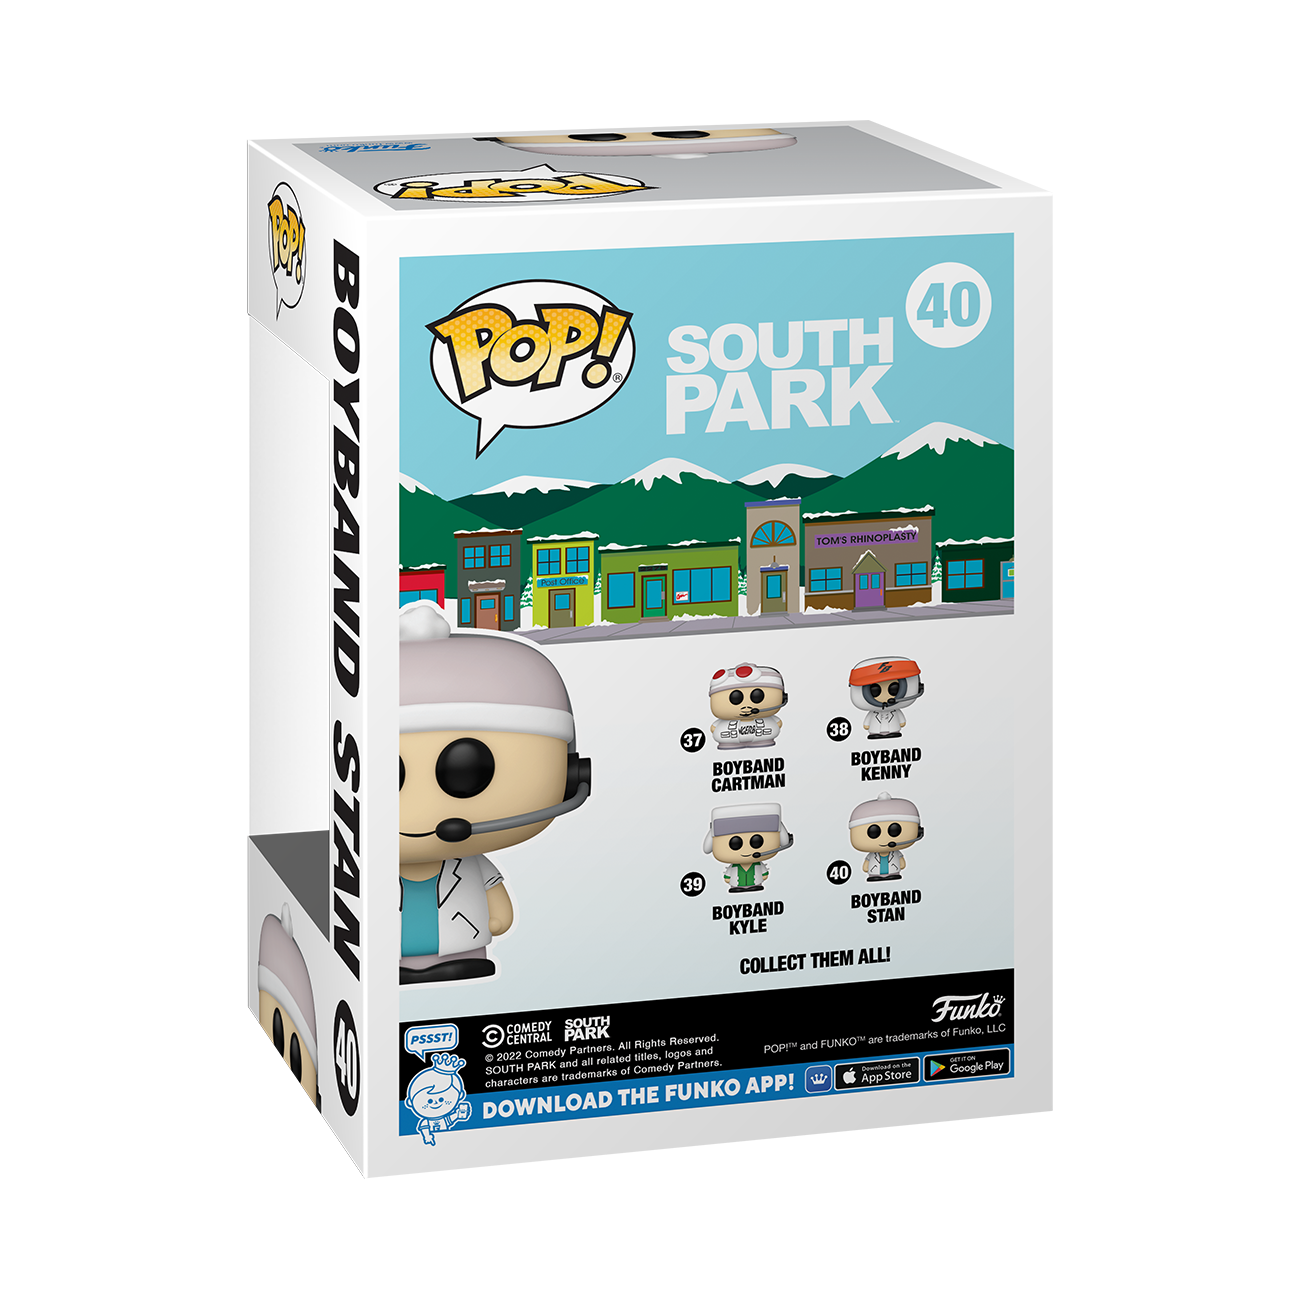 South Park: Characters Collection - Officially Licensed Paramount